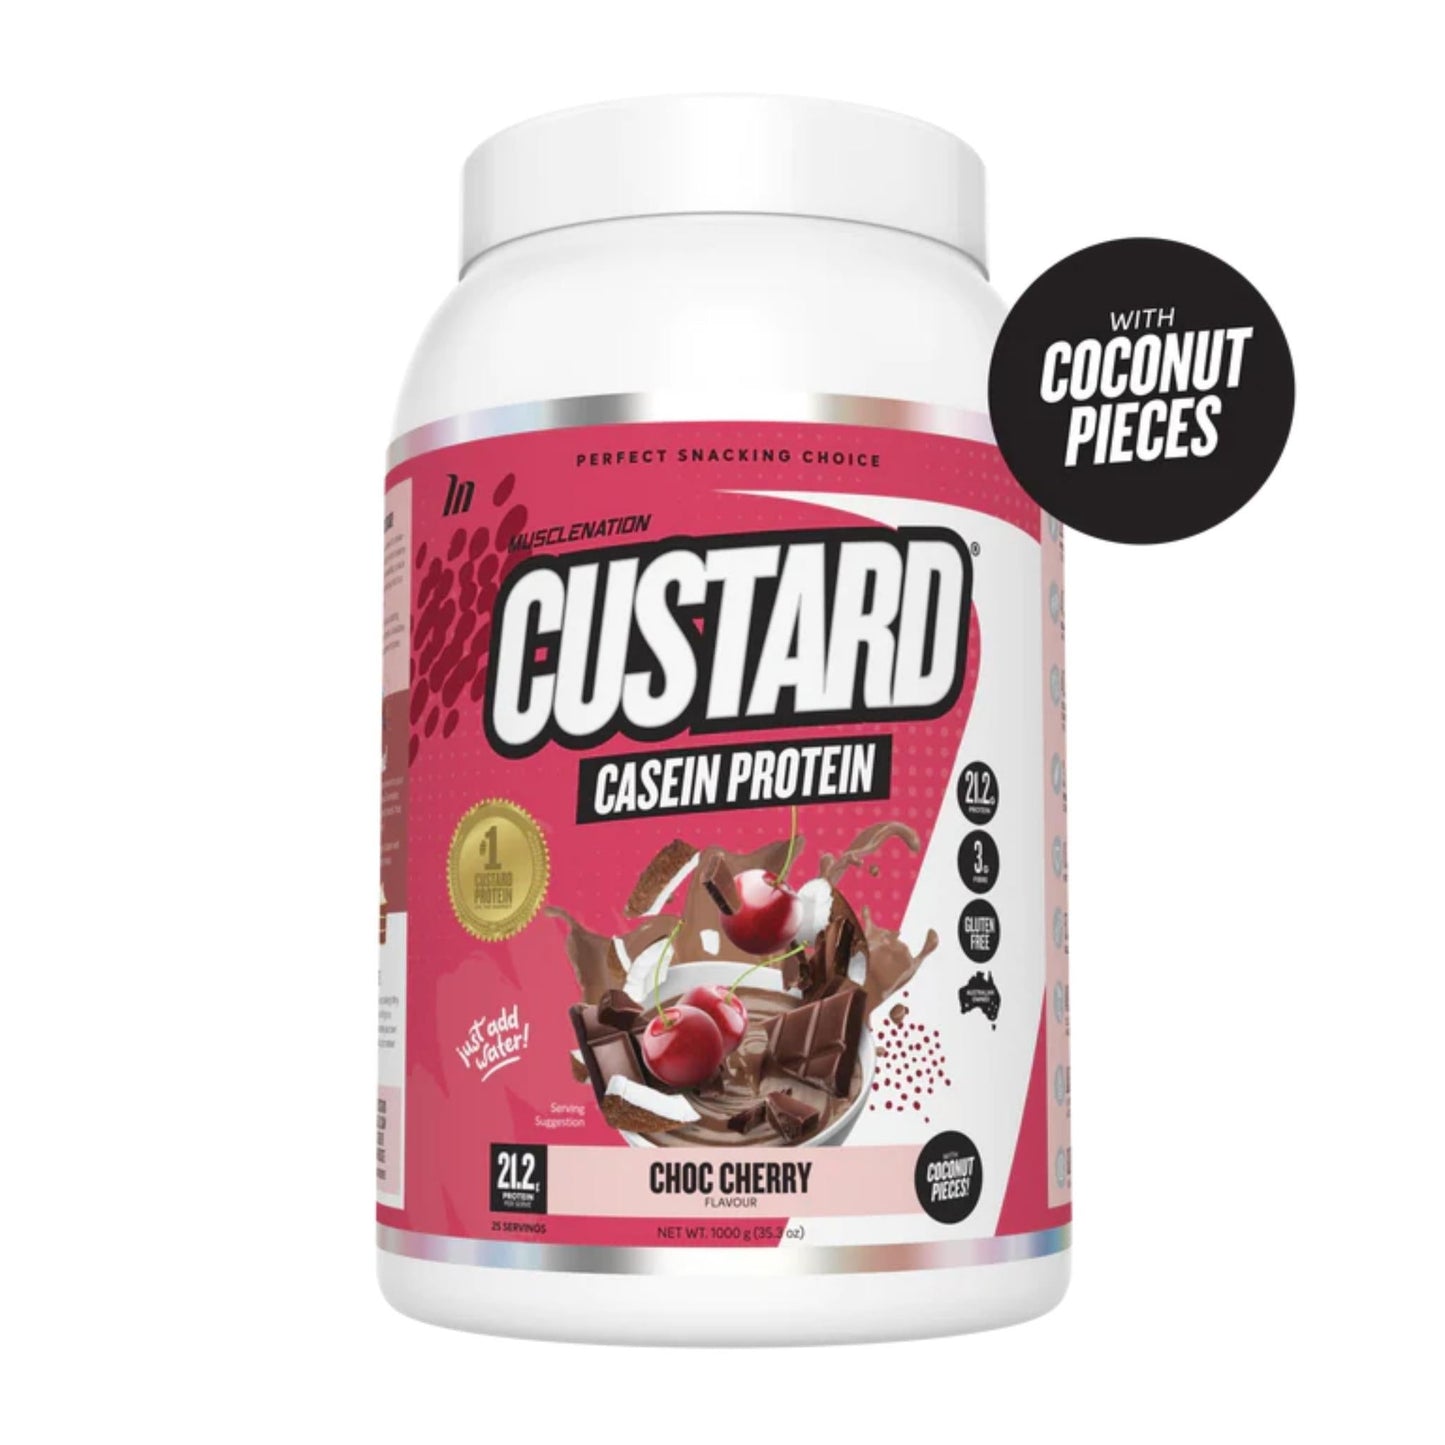 Muscle Nation - Custard Casein Protein - Supplements - Choc Cherry - The Cave Gym